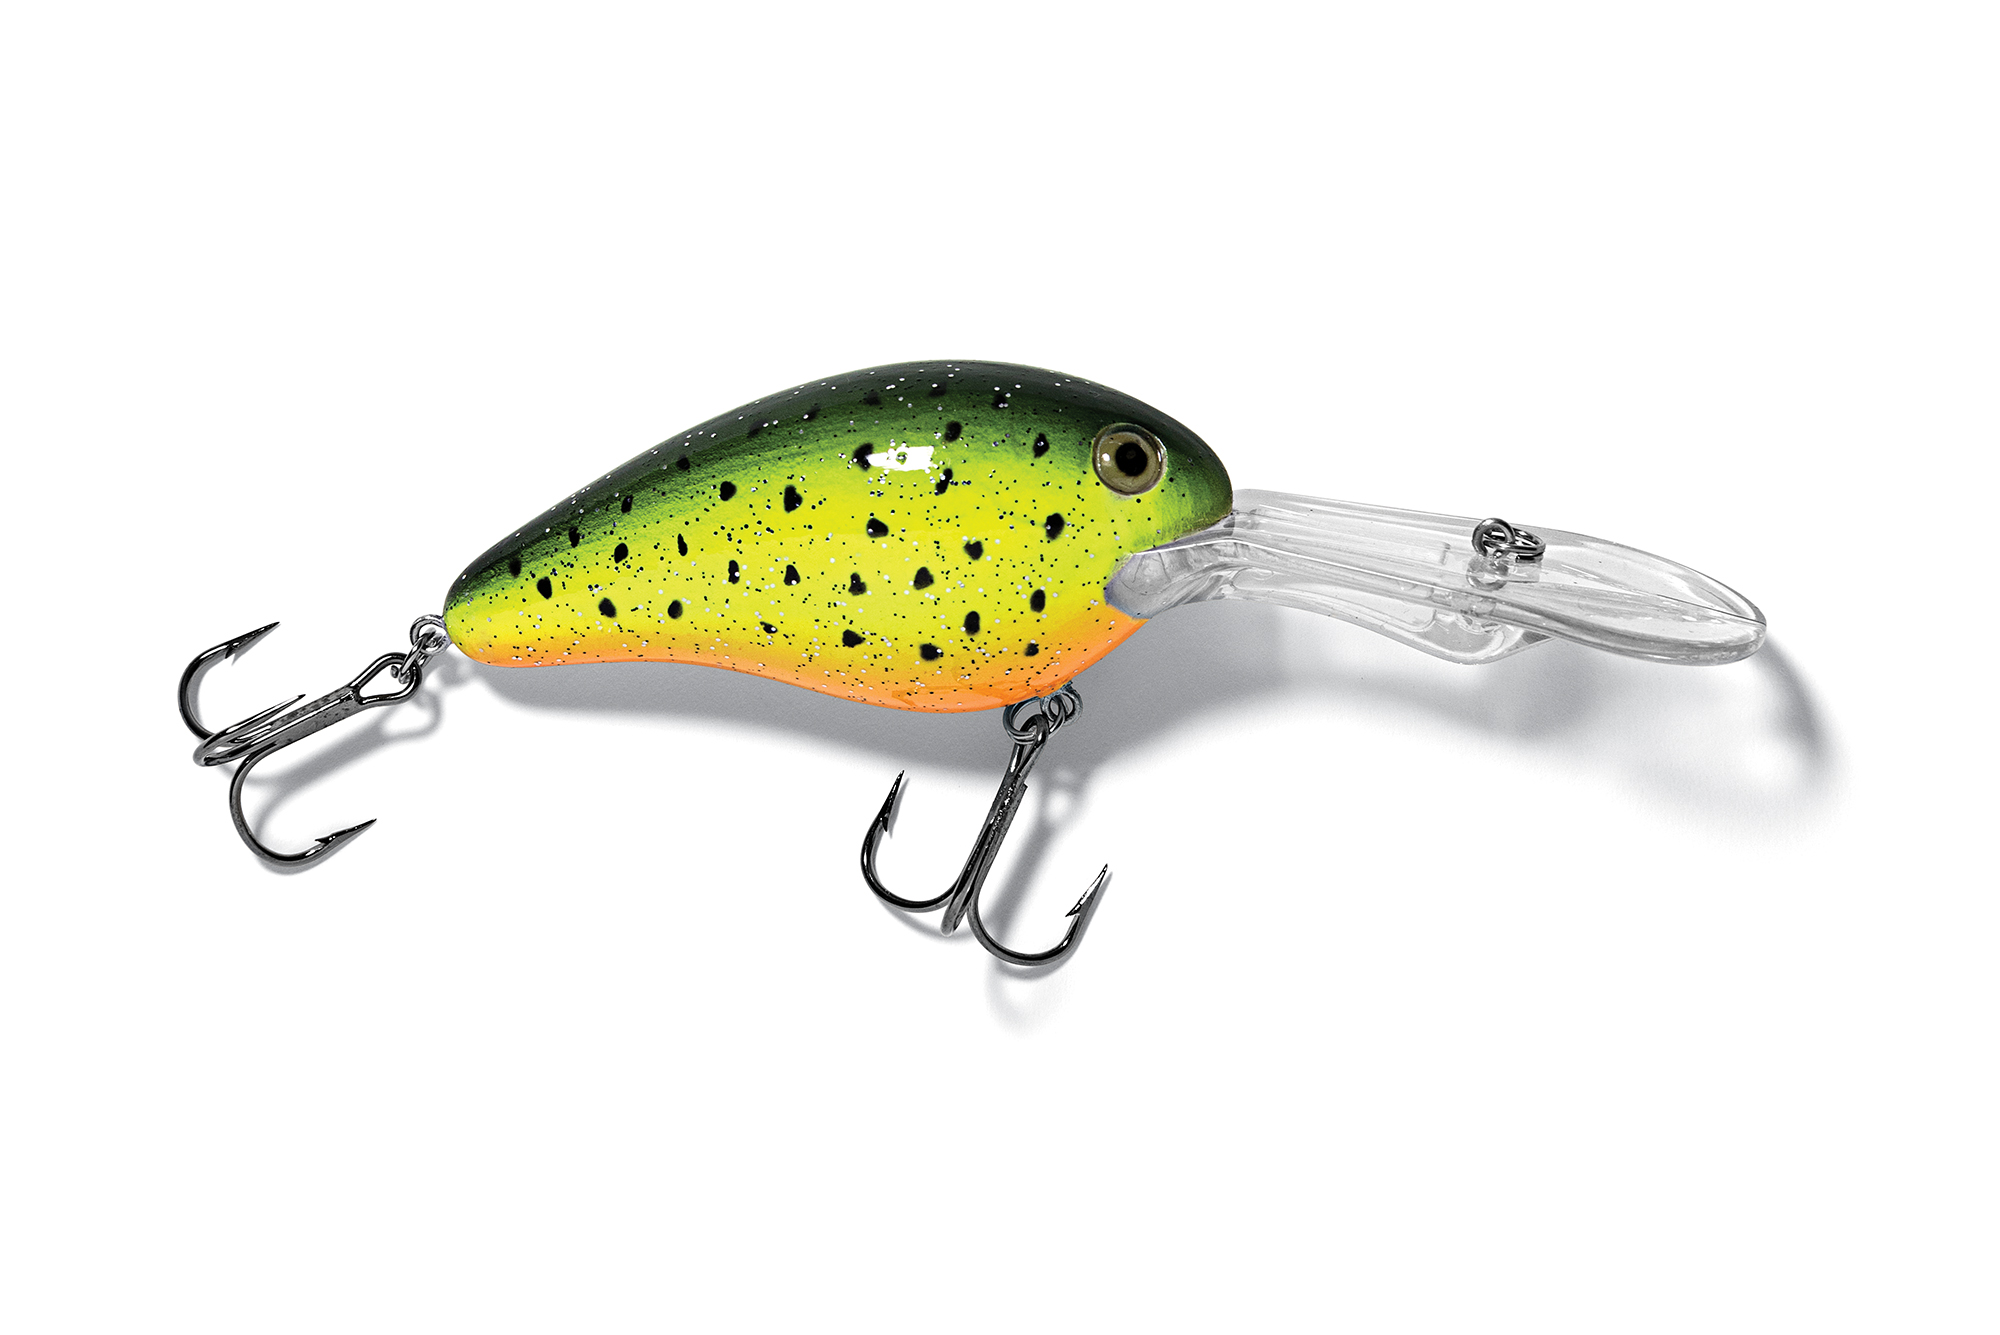 Soft Fishing Lure, Well Balanced Silicone Realistic Fishing Lure